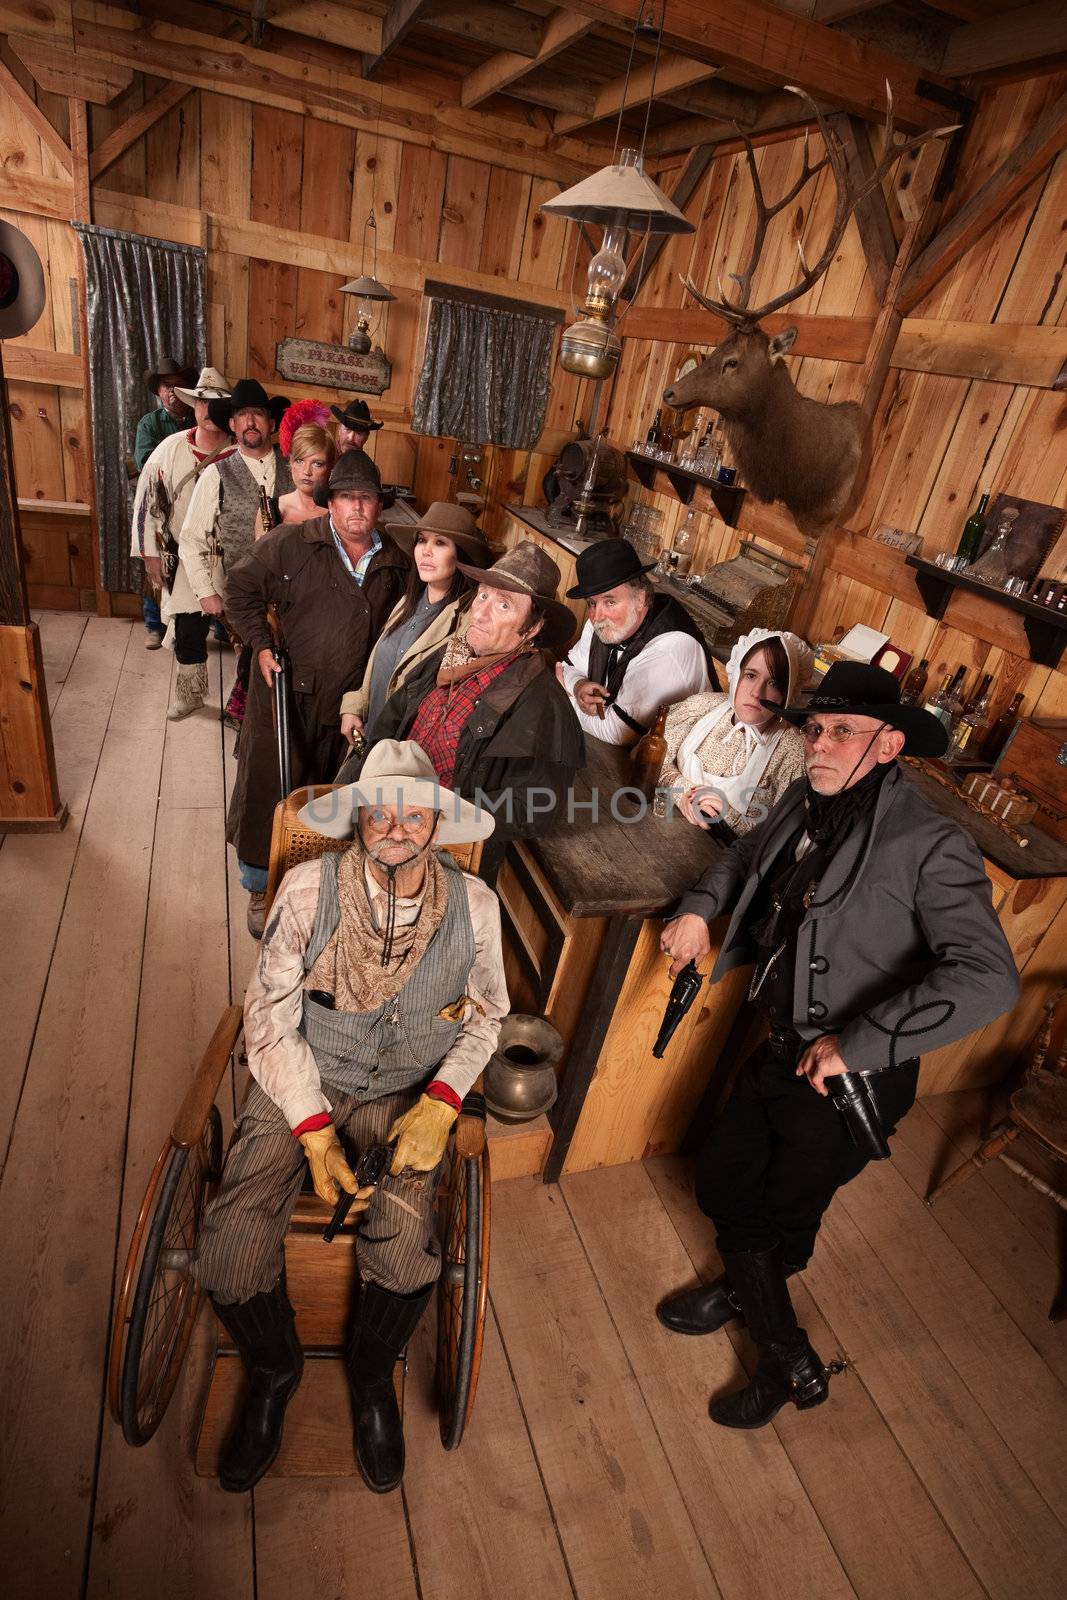 Relaxed Crowd with Guns in Saloon by Creatista